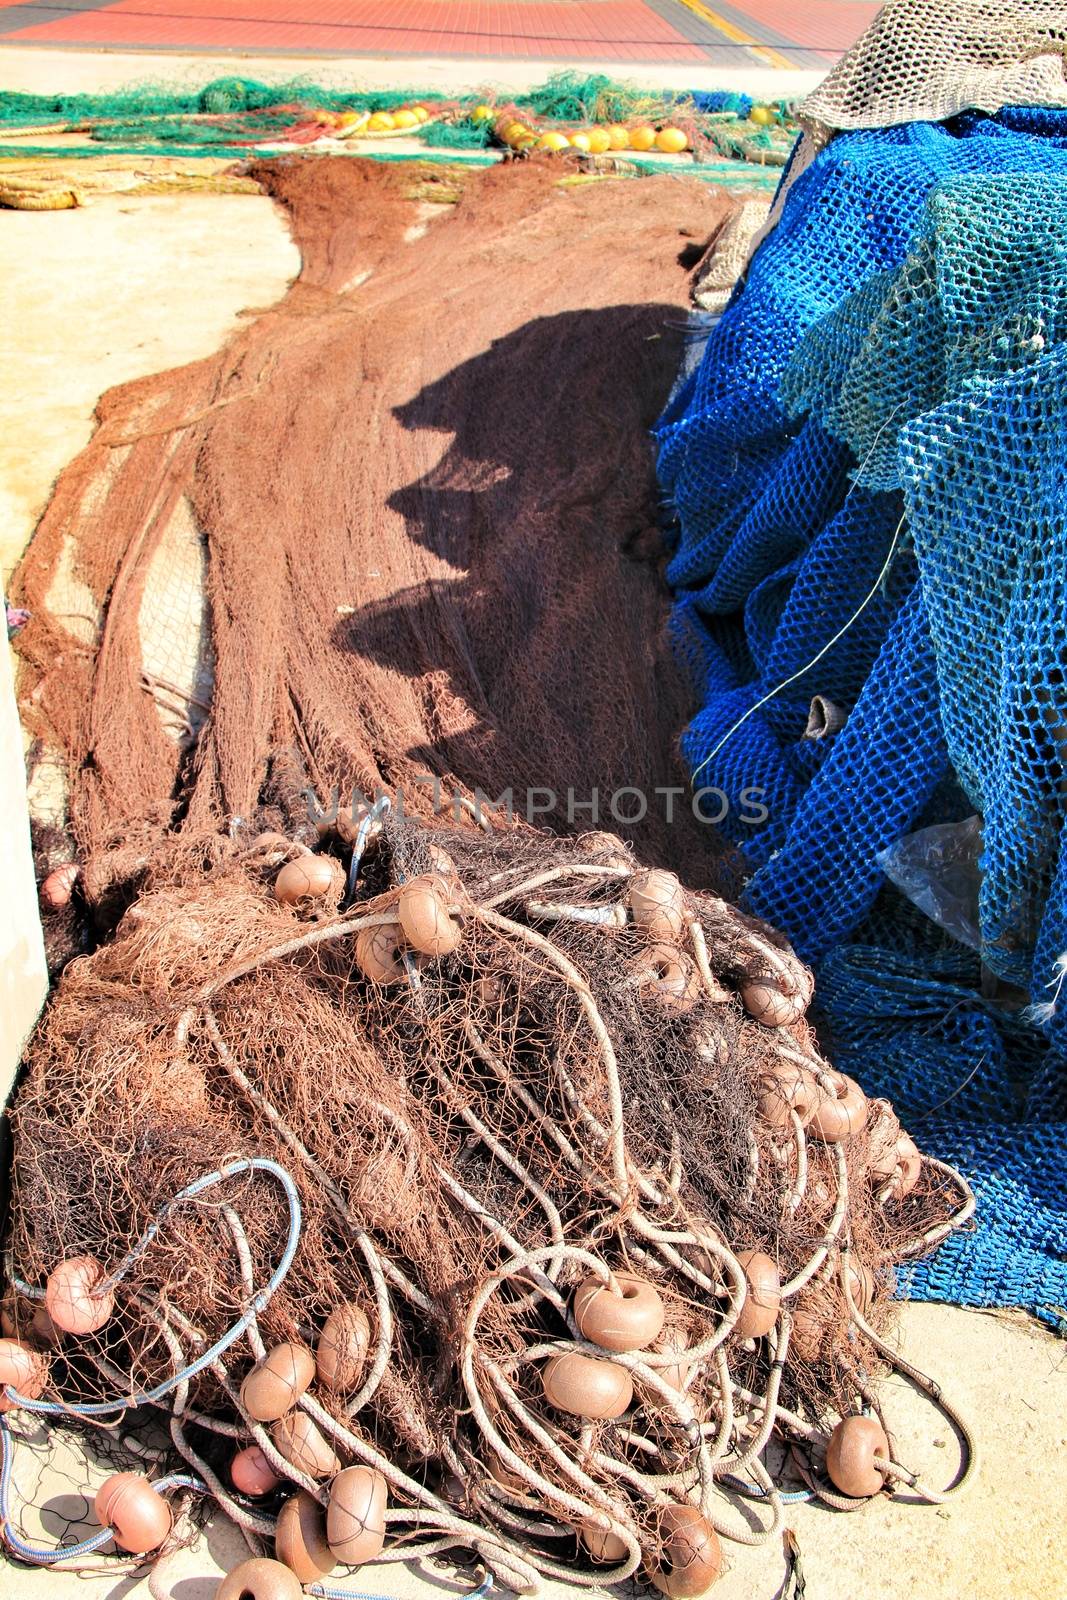 Fishing nets background in the port by soniabonet